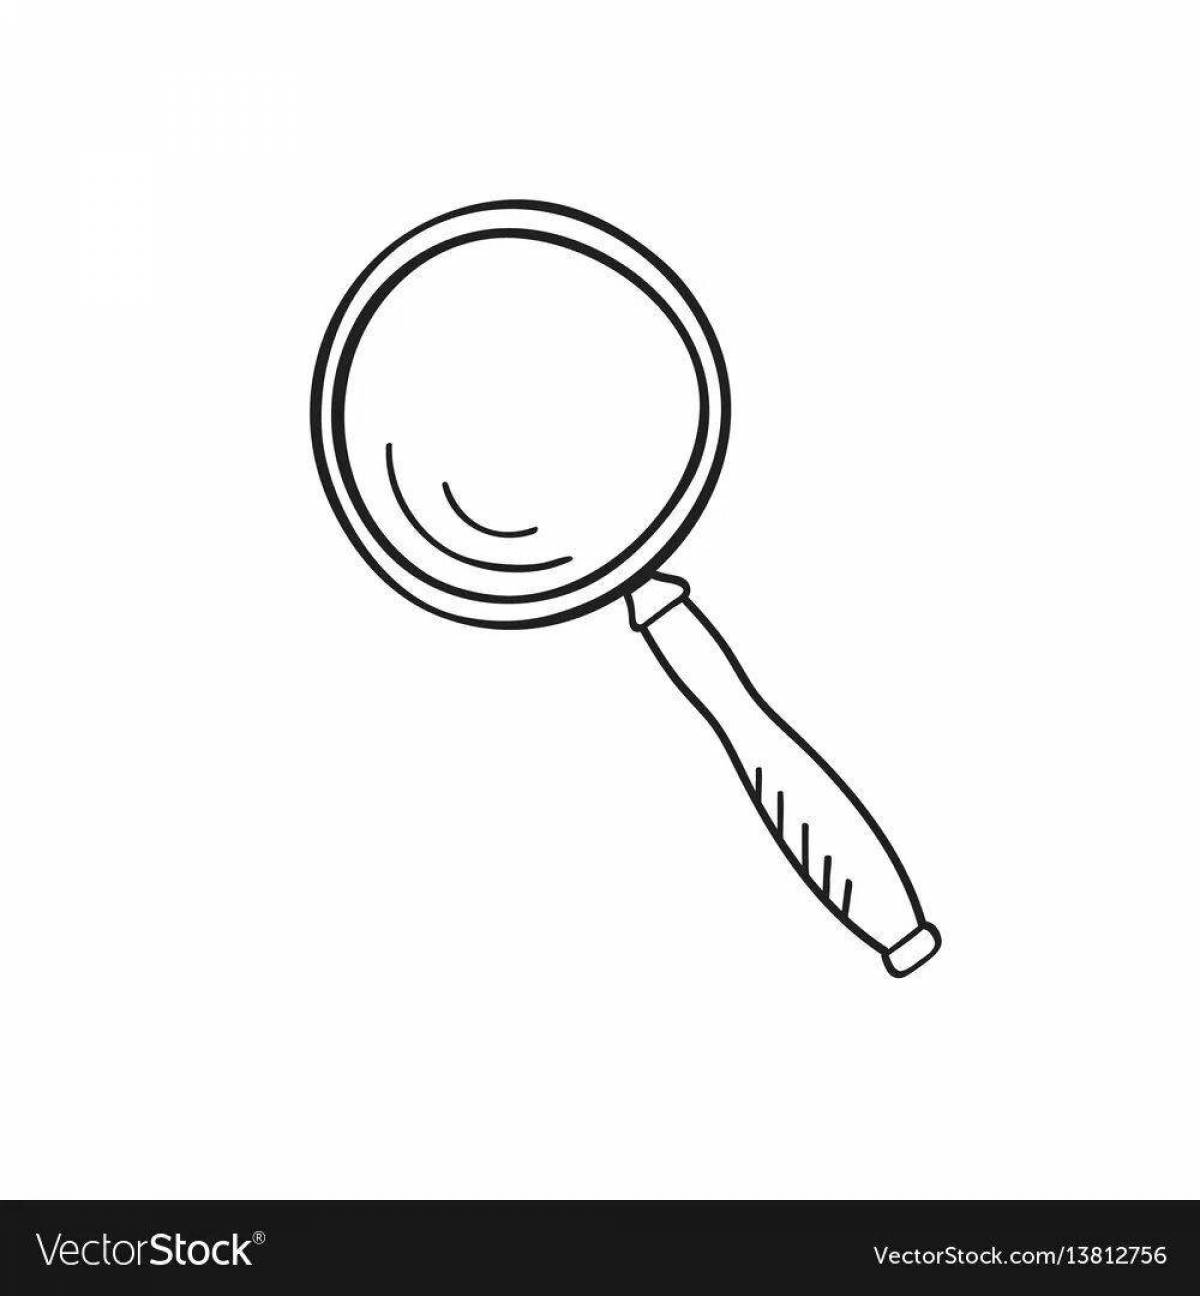 Coloring book with a magnifying glass for the little ones